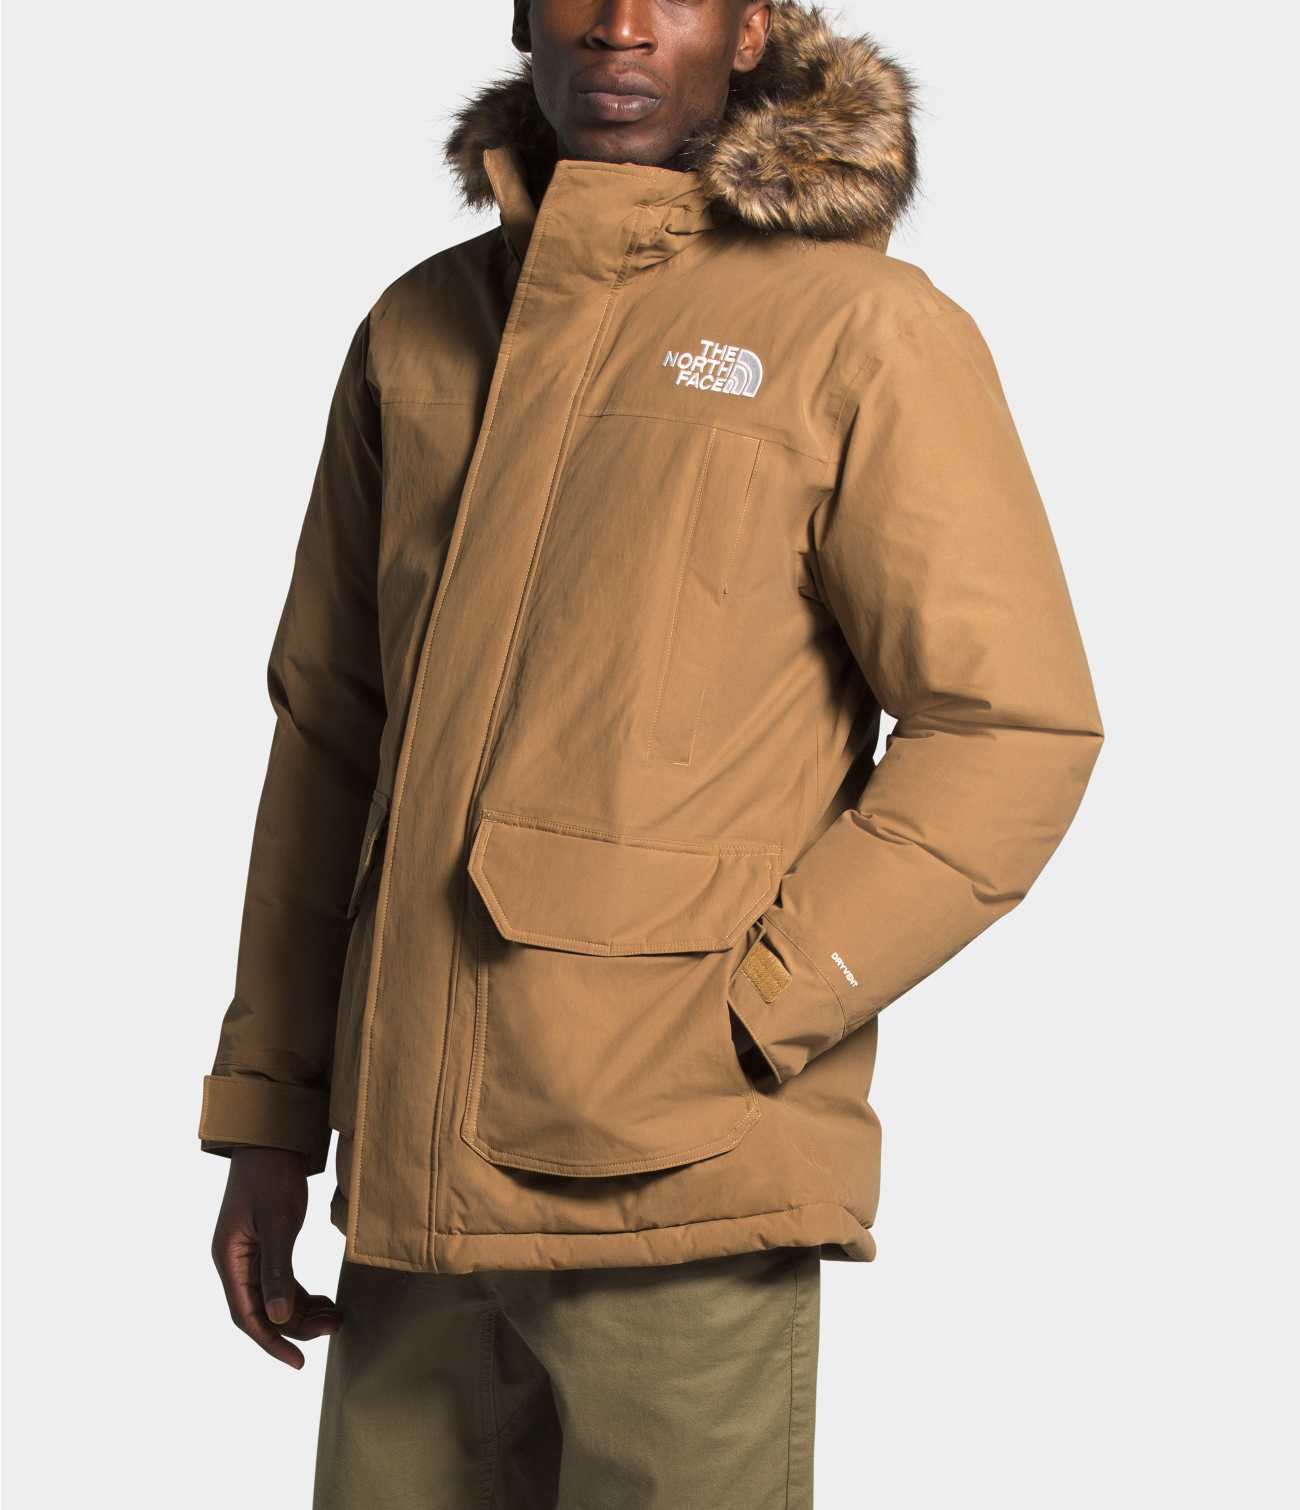 The North Face / Men's Printed DryVent Mountain Parka